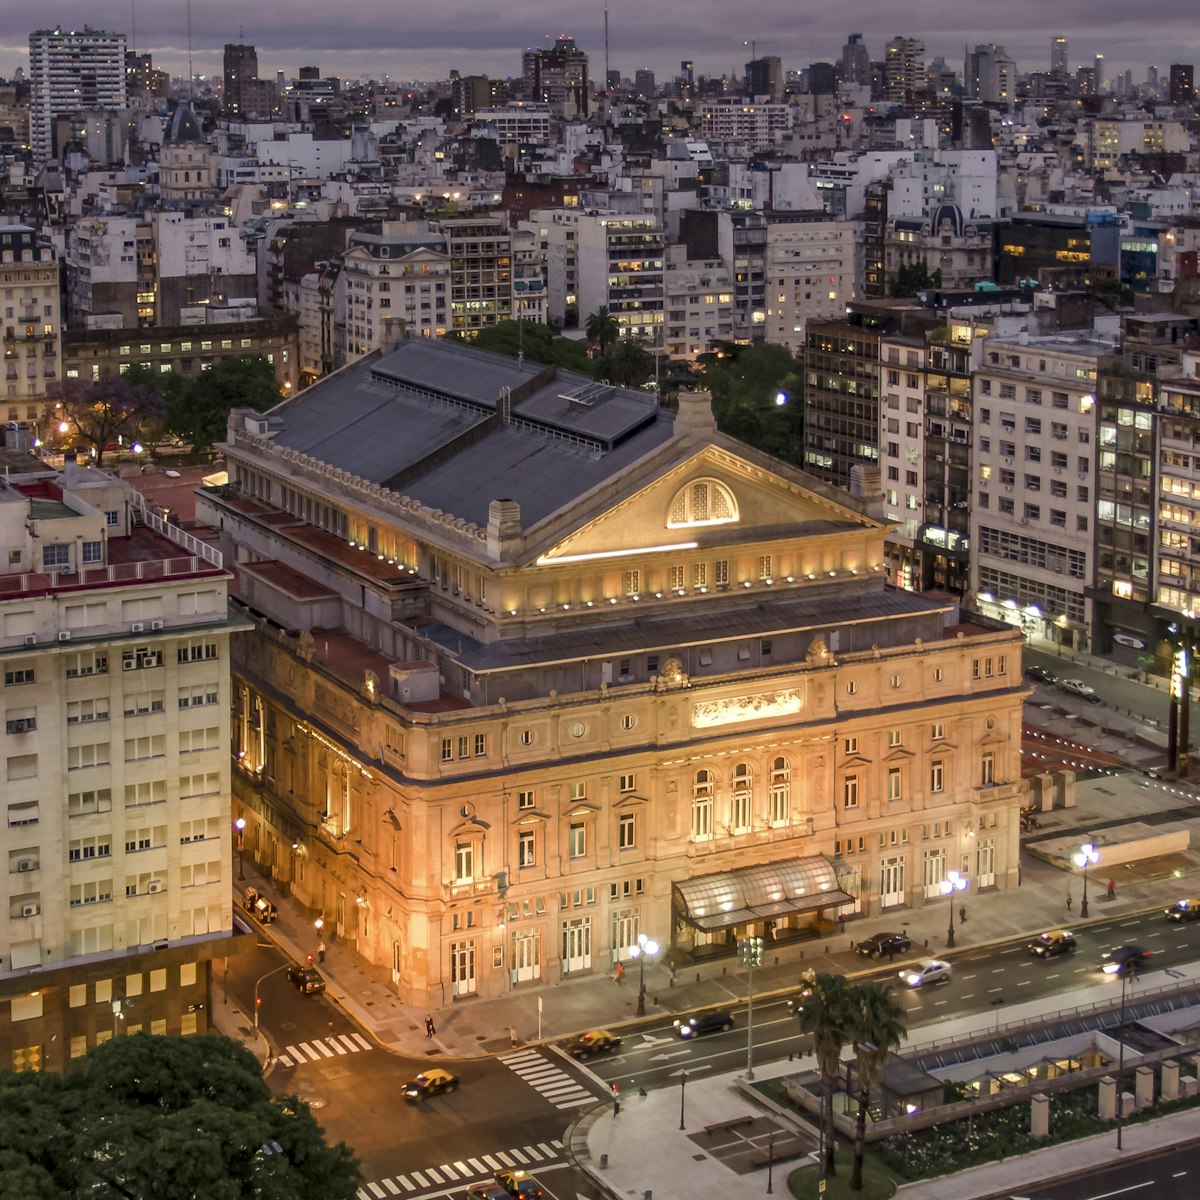 High angle view of "Teatro Col?n" (Spanish for Columbus Theatre) at twilight.Buenos Aires, Argentina